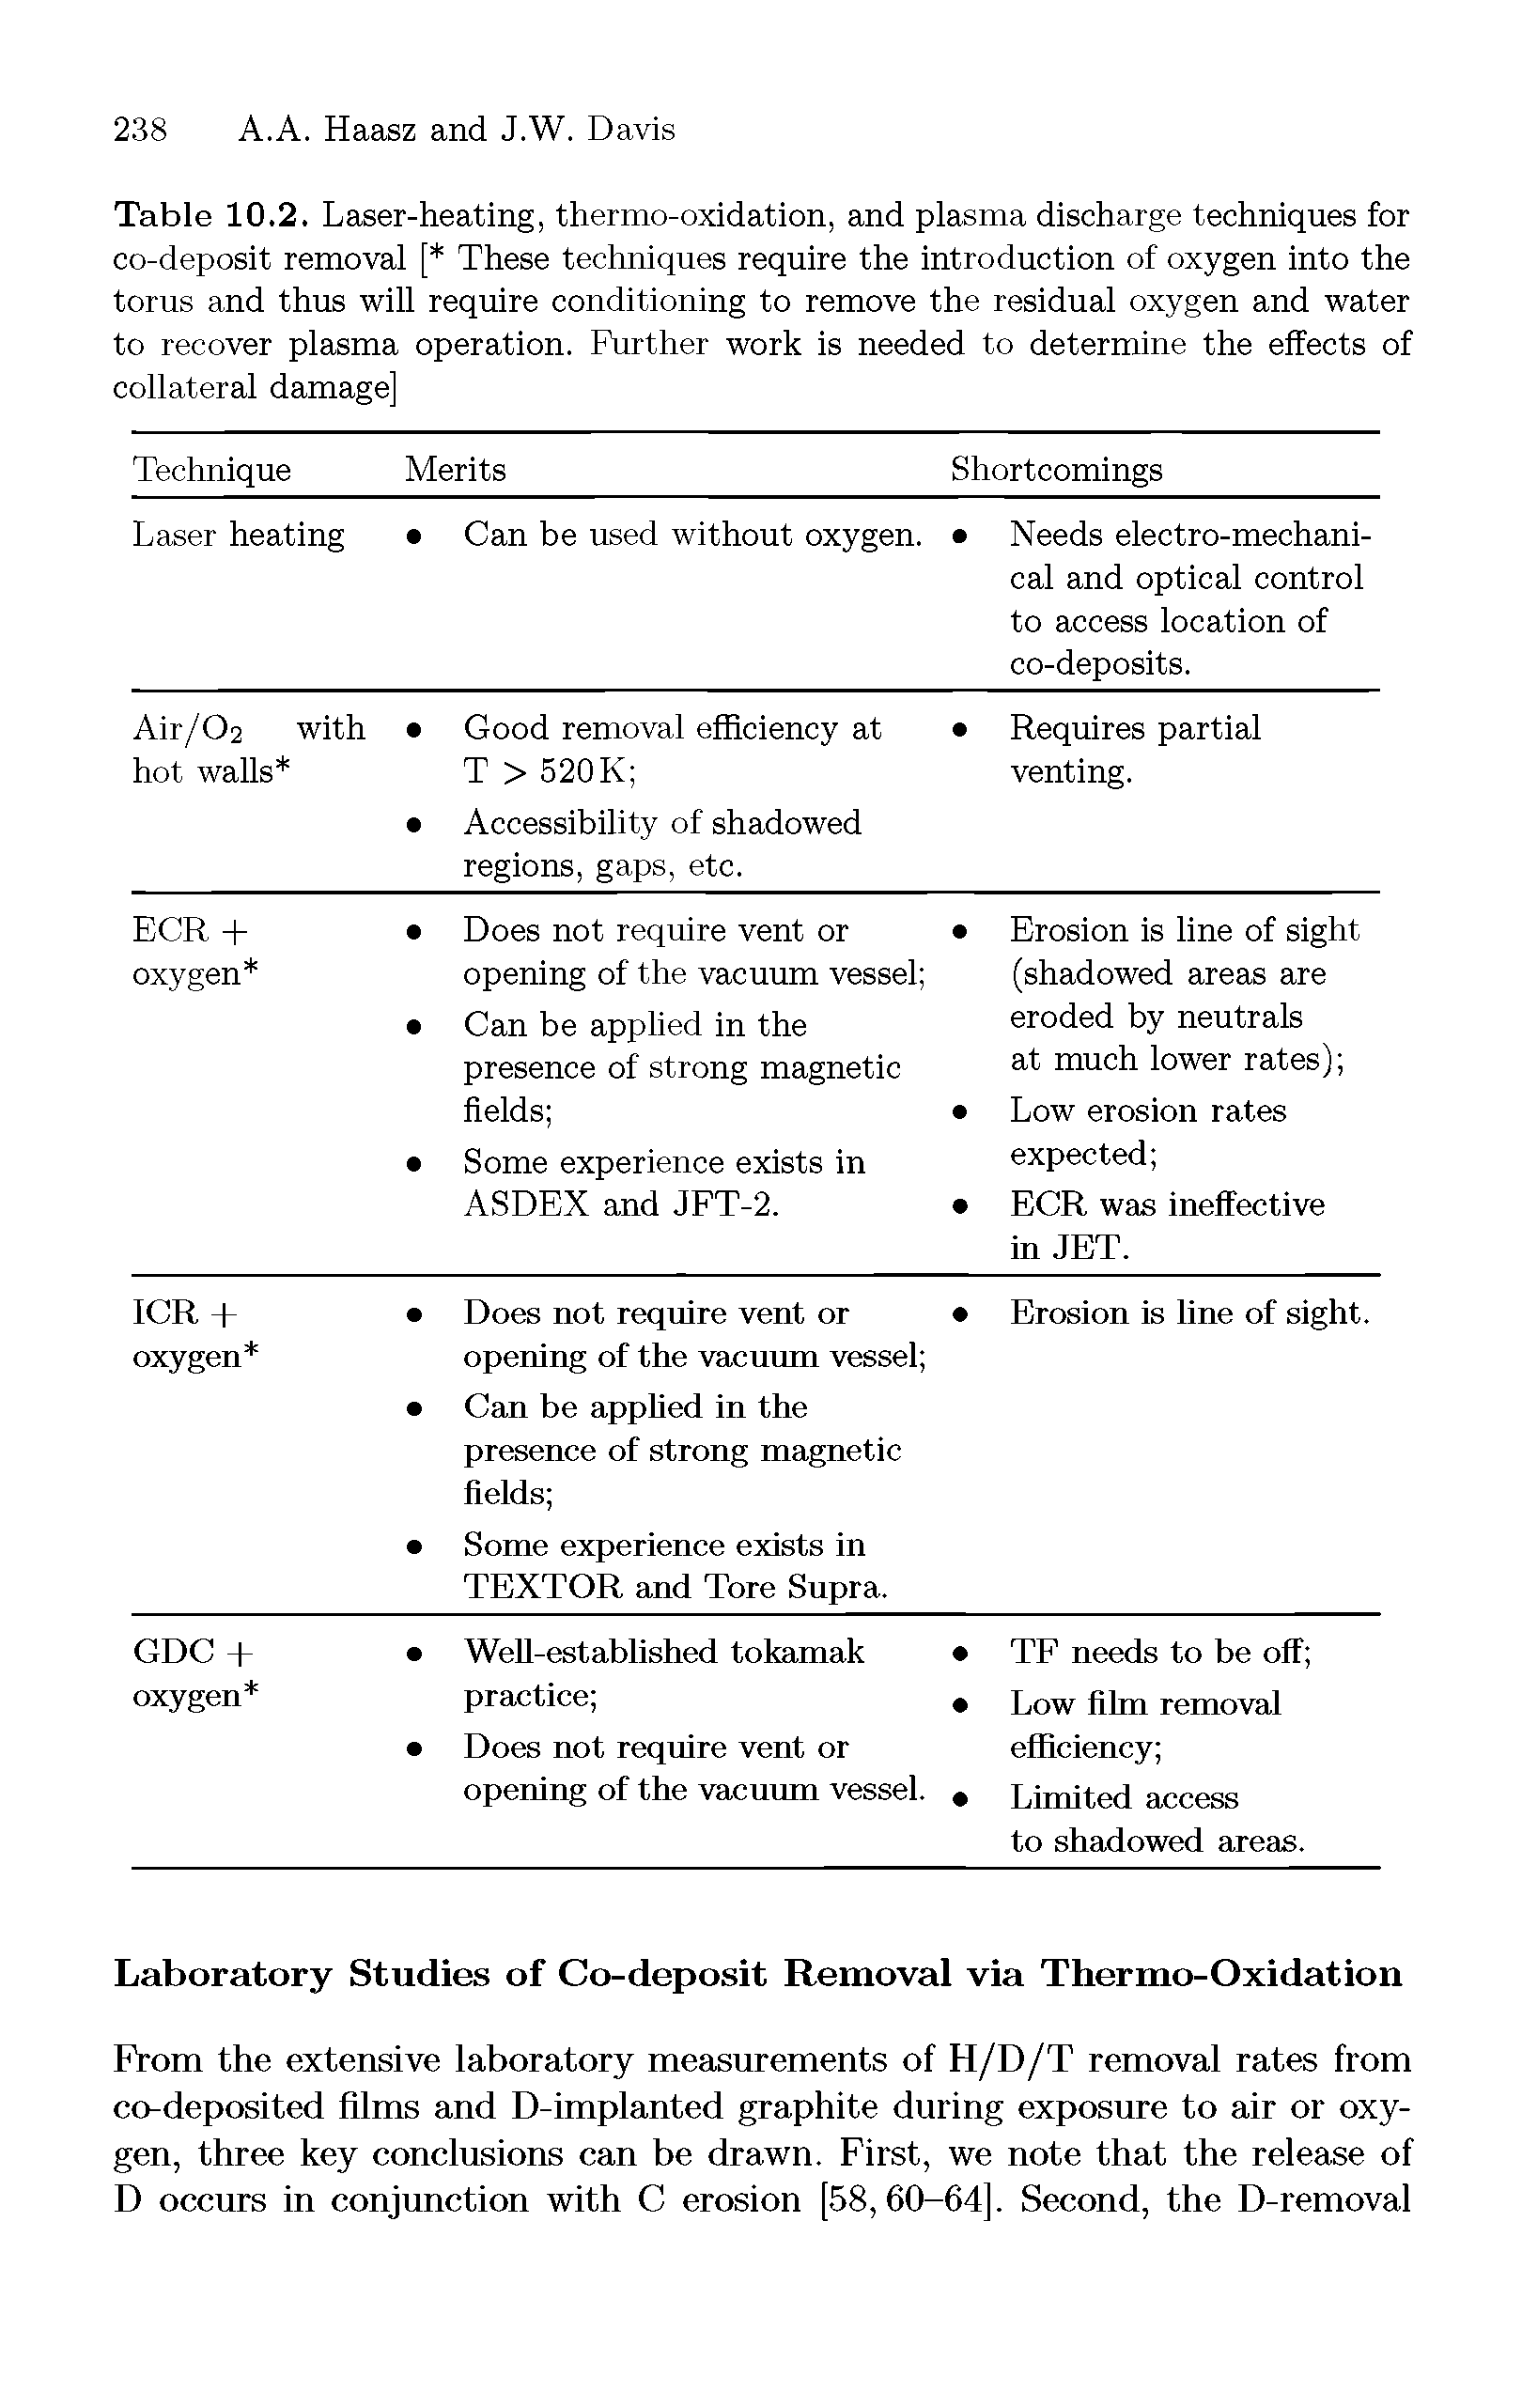 Table 10.2. Laser-heating, thermo-oxidation, and plasma discharge techniques for co-deposit removal [ These techniques require the introduction of oxygen into the torus and thus will require conditioning to remove the residual oxygen and water to recover plasma operation. Further work is needed to determine the effects of collateral damage]...